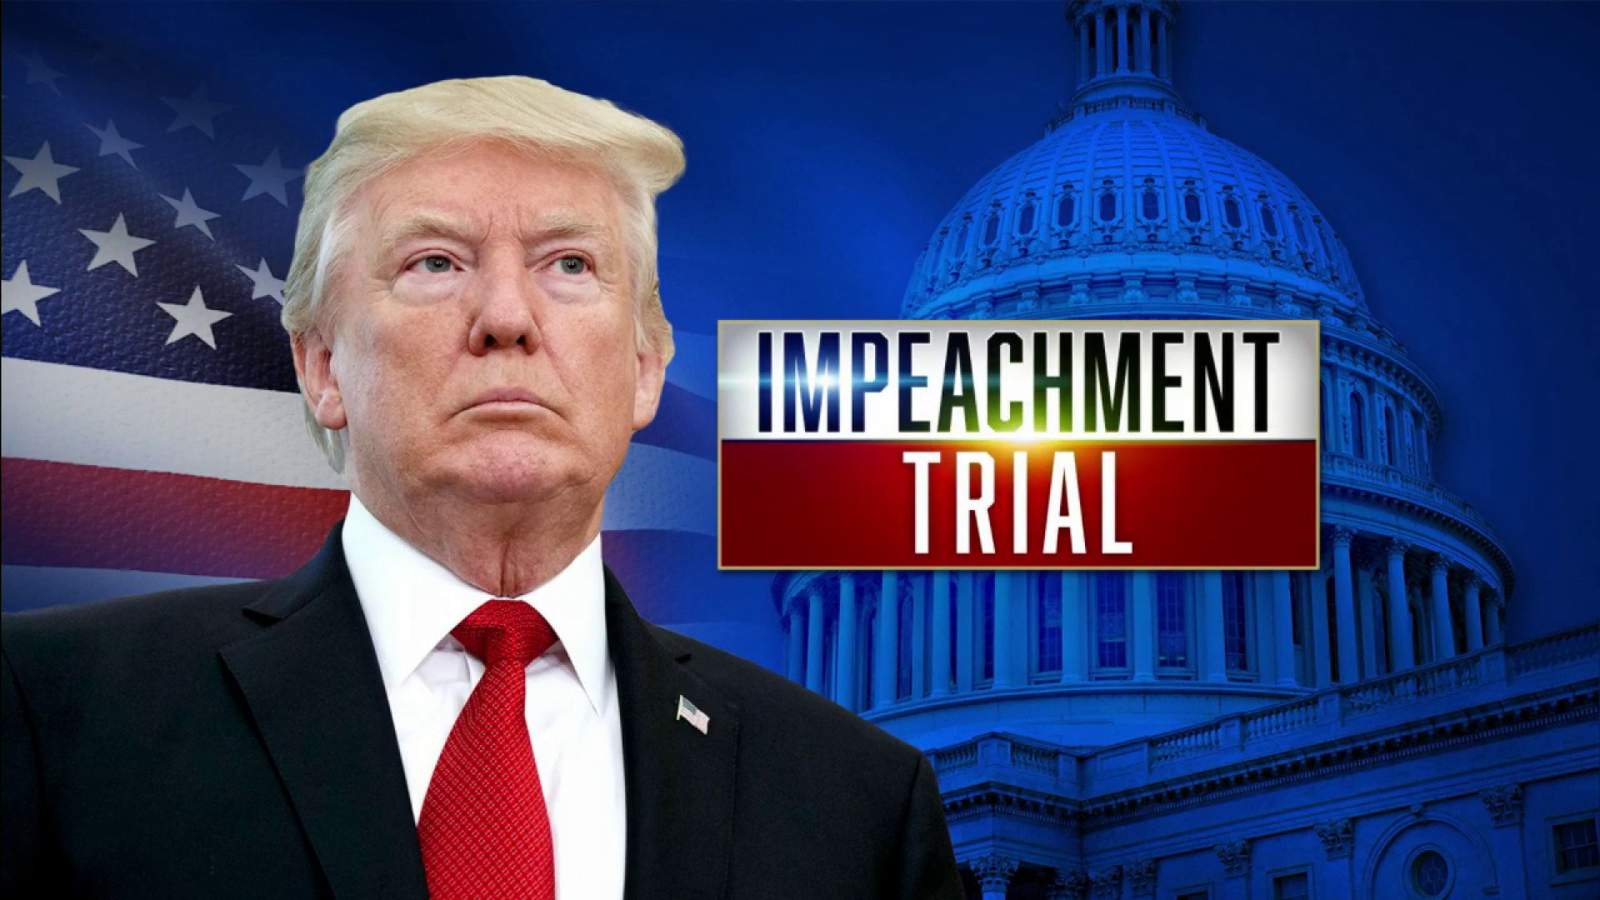 Trump impeachment trial: Closing arguments expected on Saturday morning